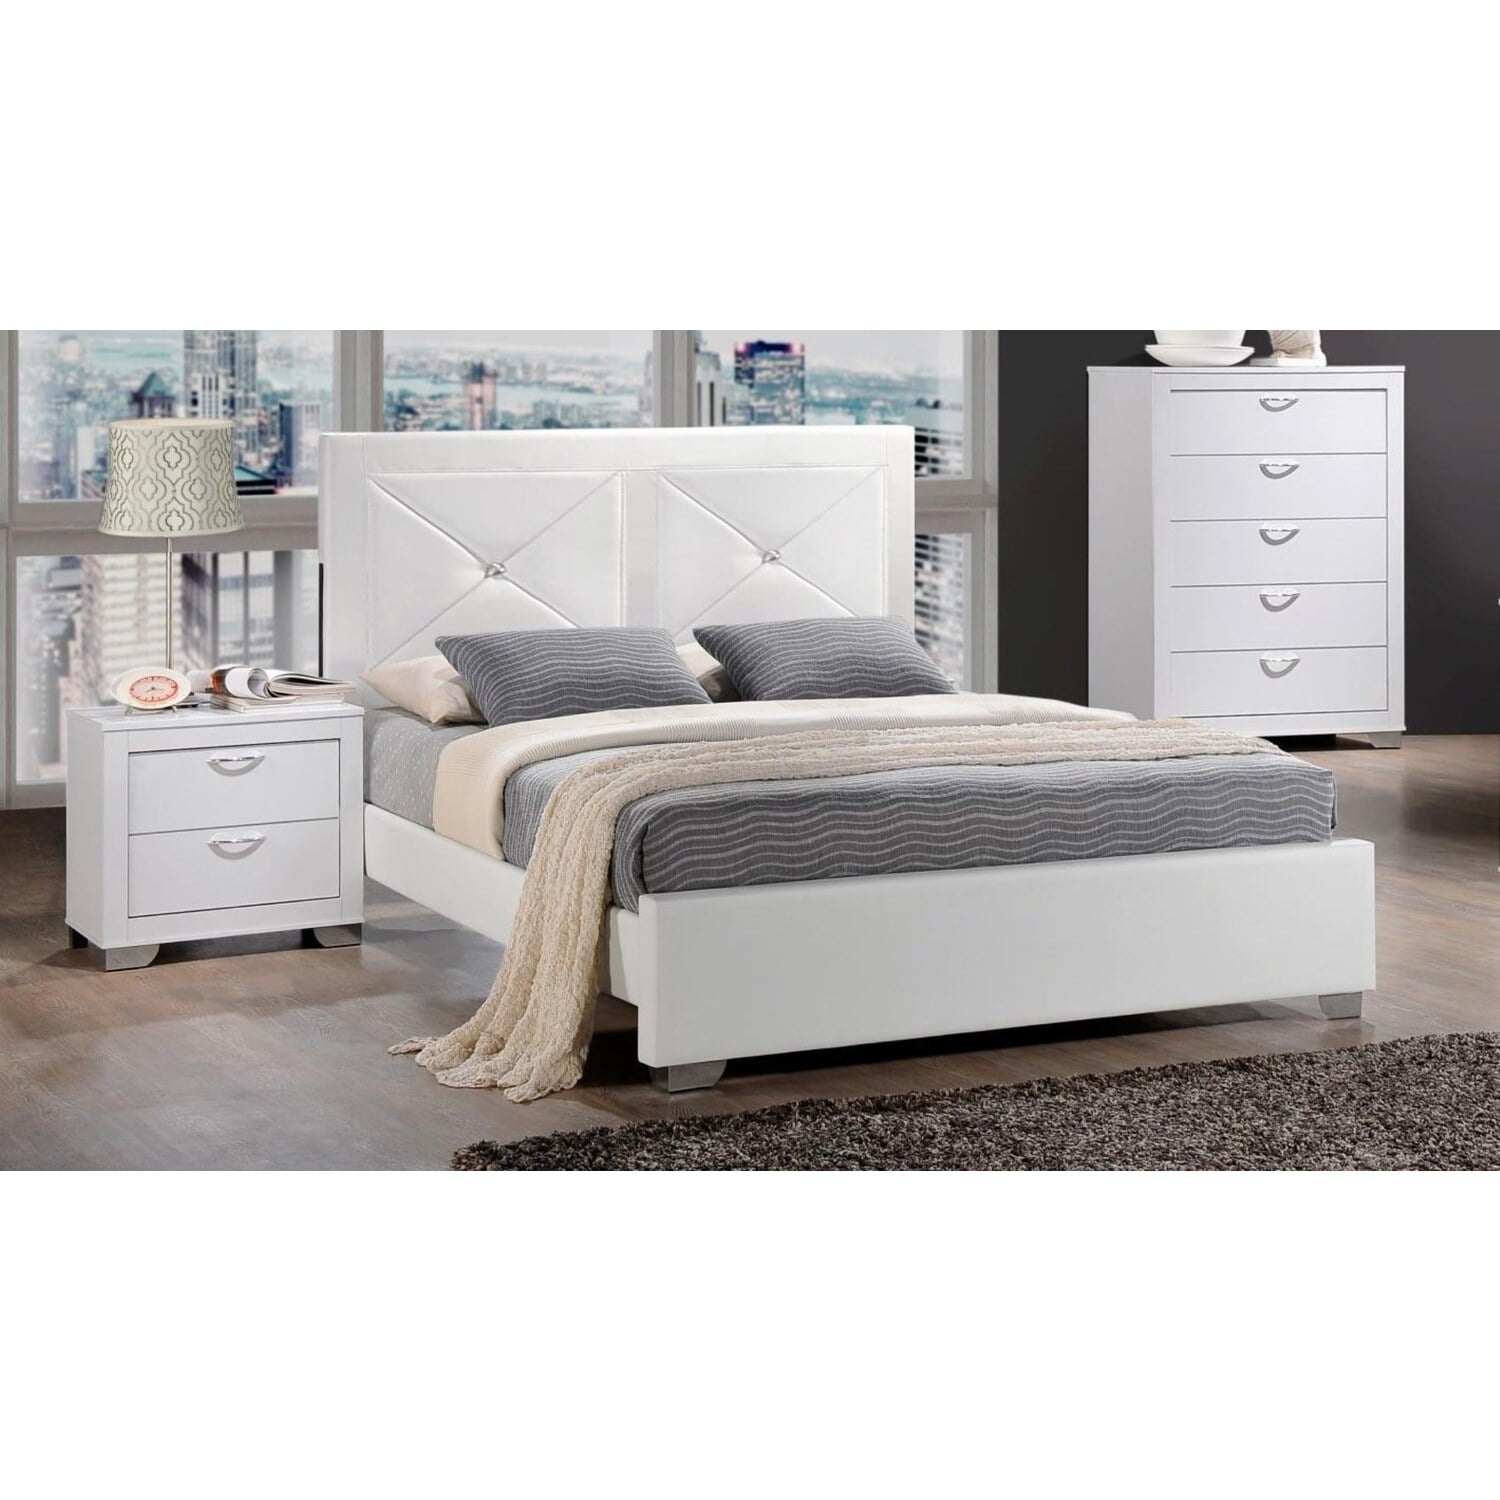 Brahma King Bed in White Finish